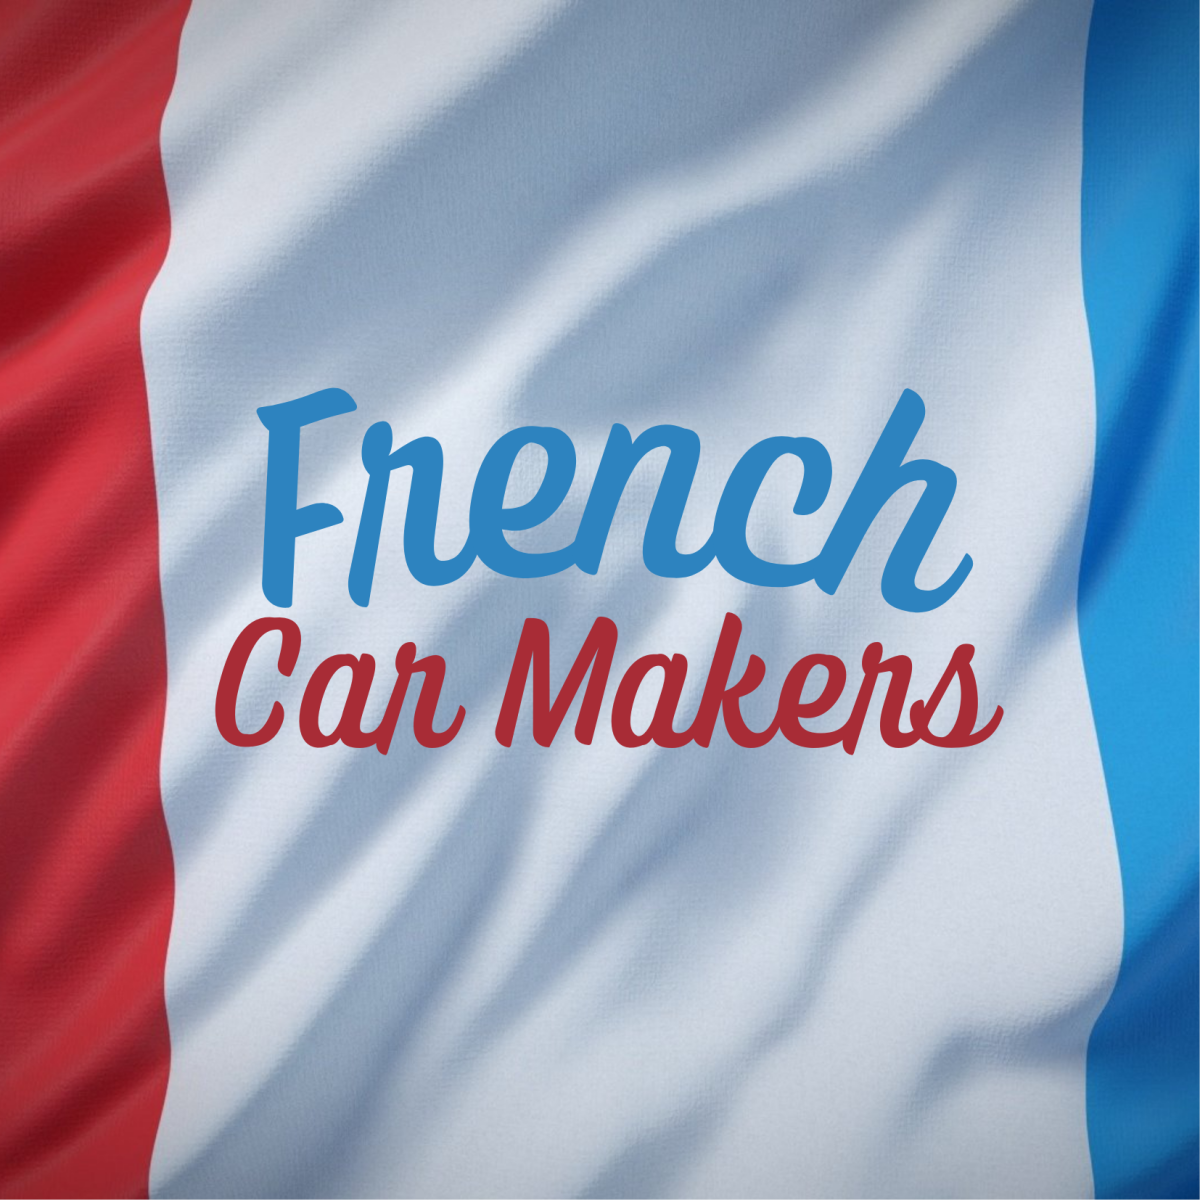 Manufacturers of French vehicles